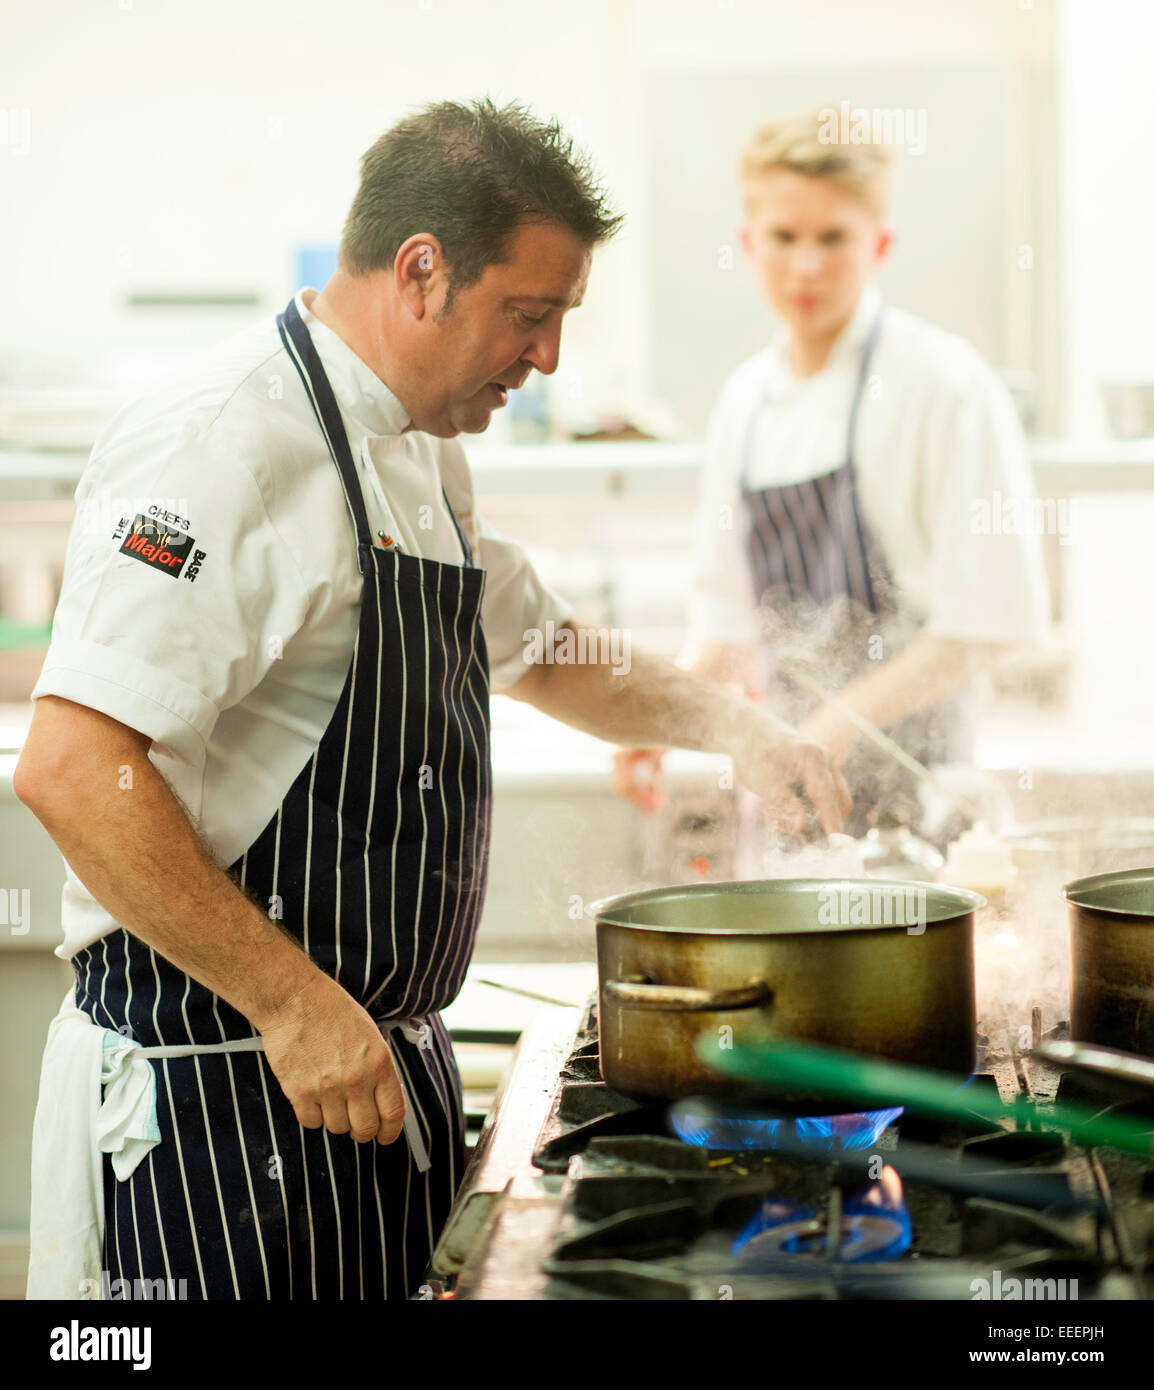 Chefs and kitchen staff working in a busy kitchen Stock Photo